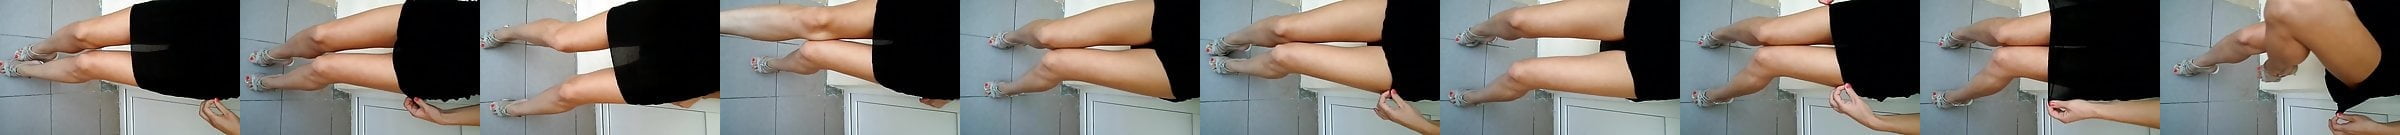 Secretary With Amazing Hair Body Legs Feet And Sandals 2